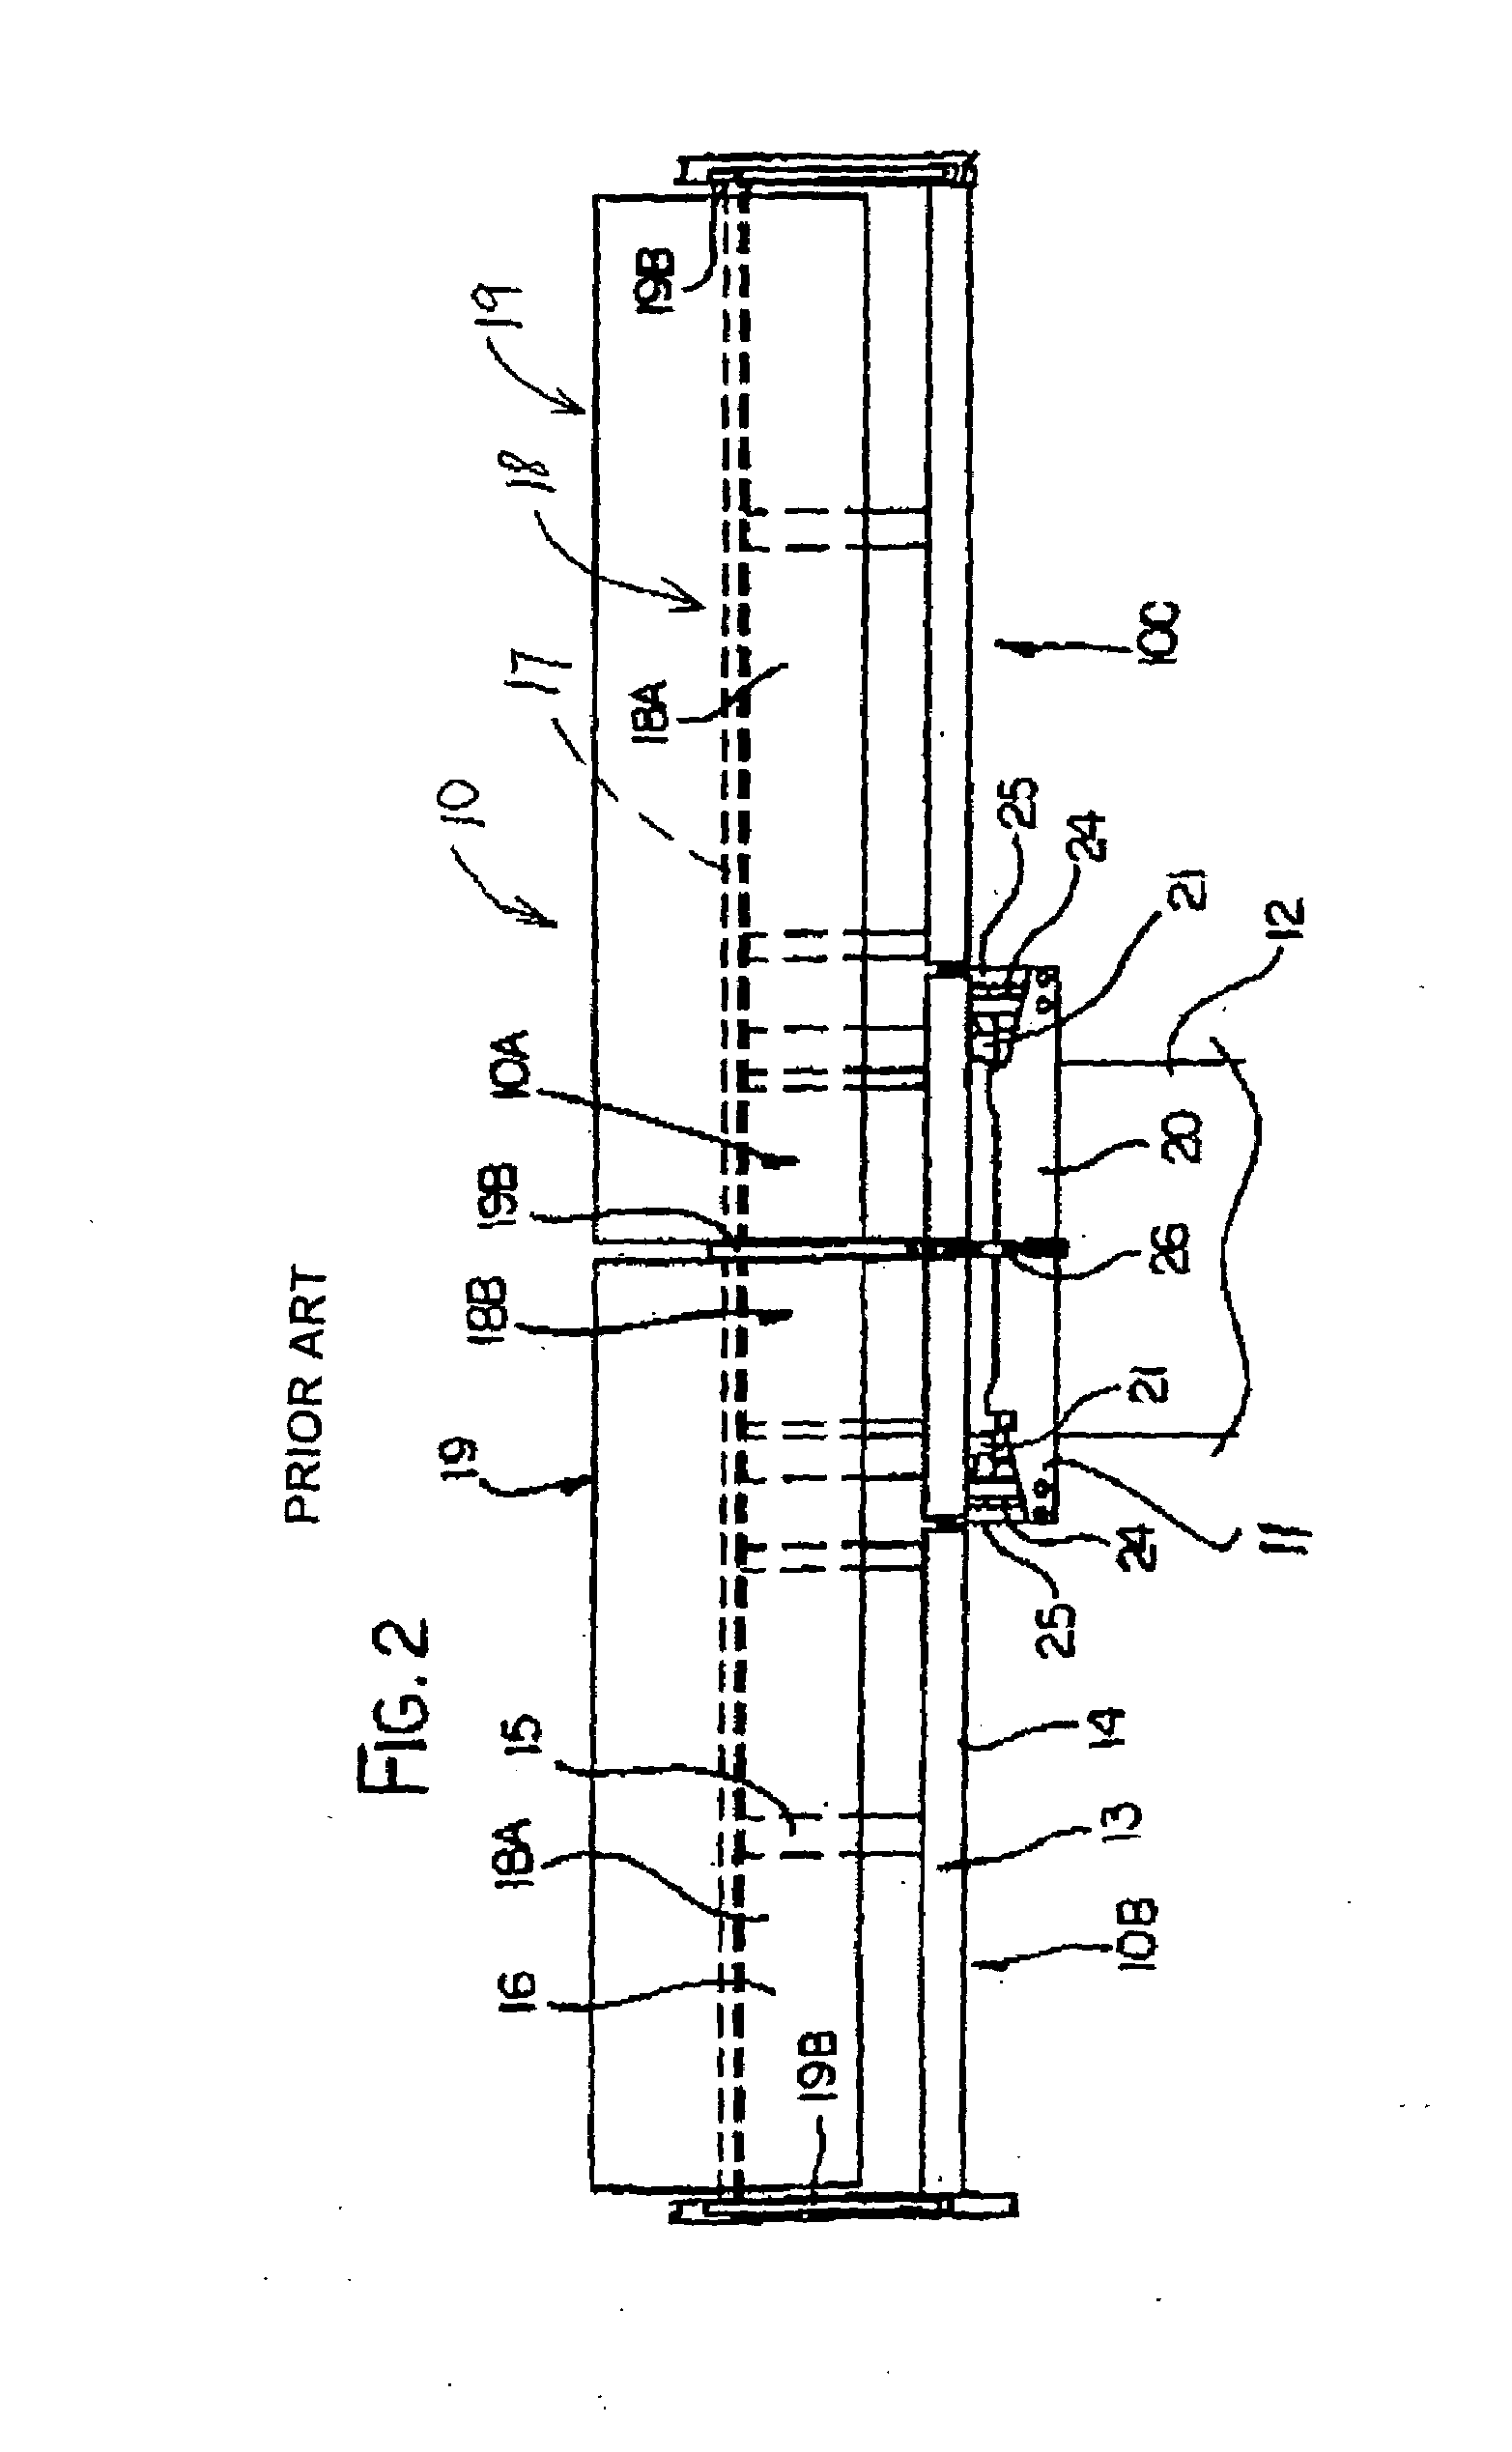 Device for maintaining wing balance on a multi-section header